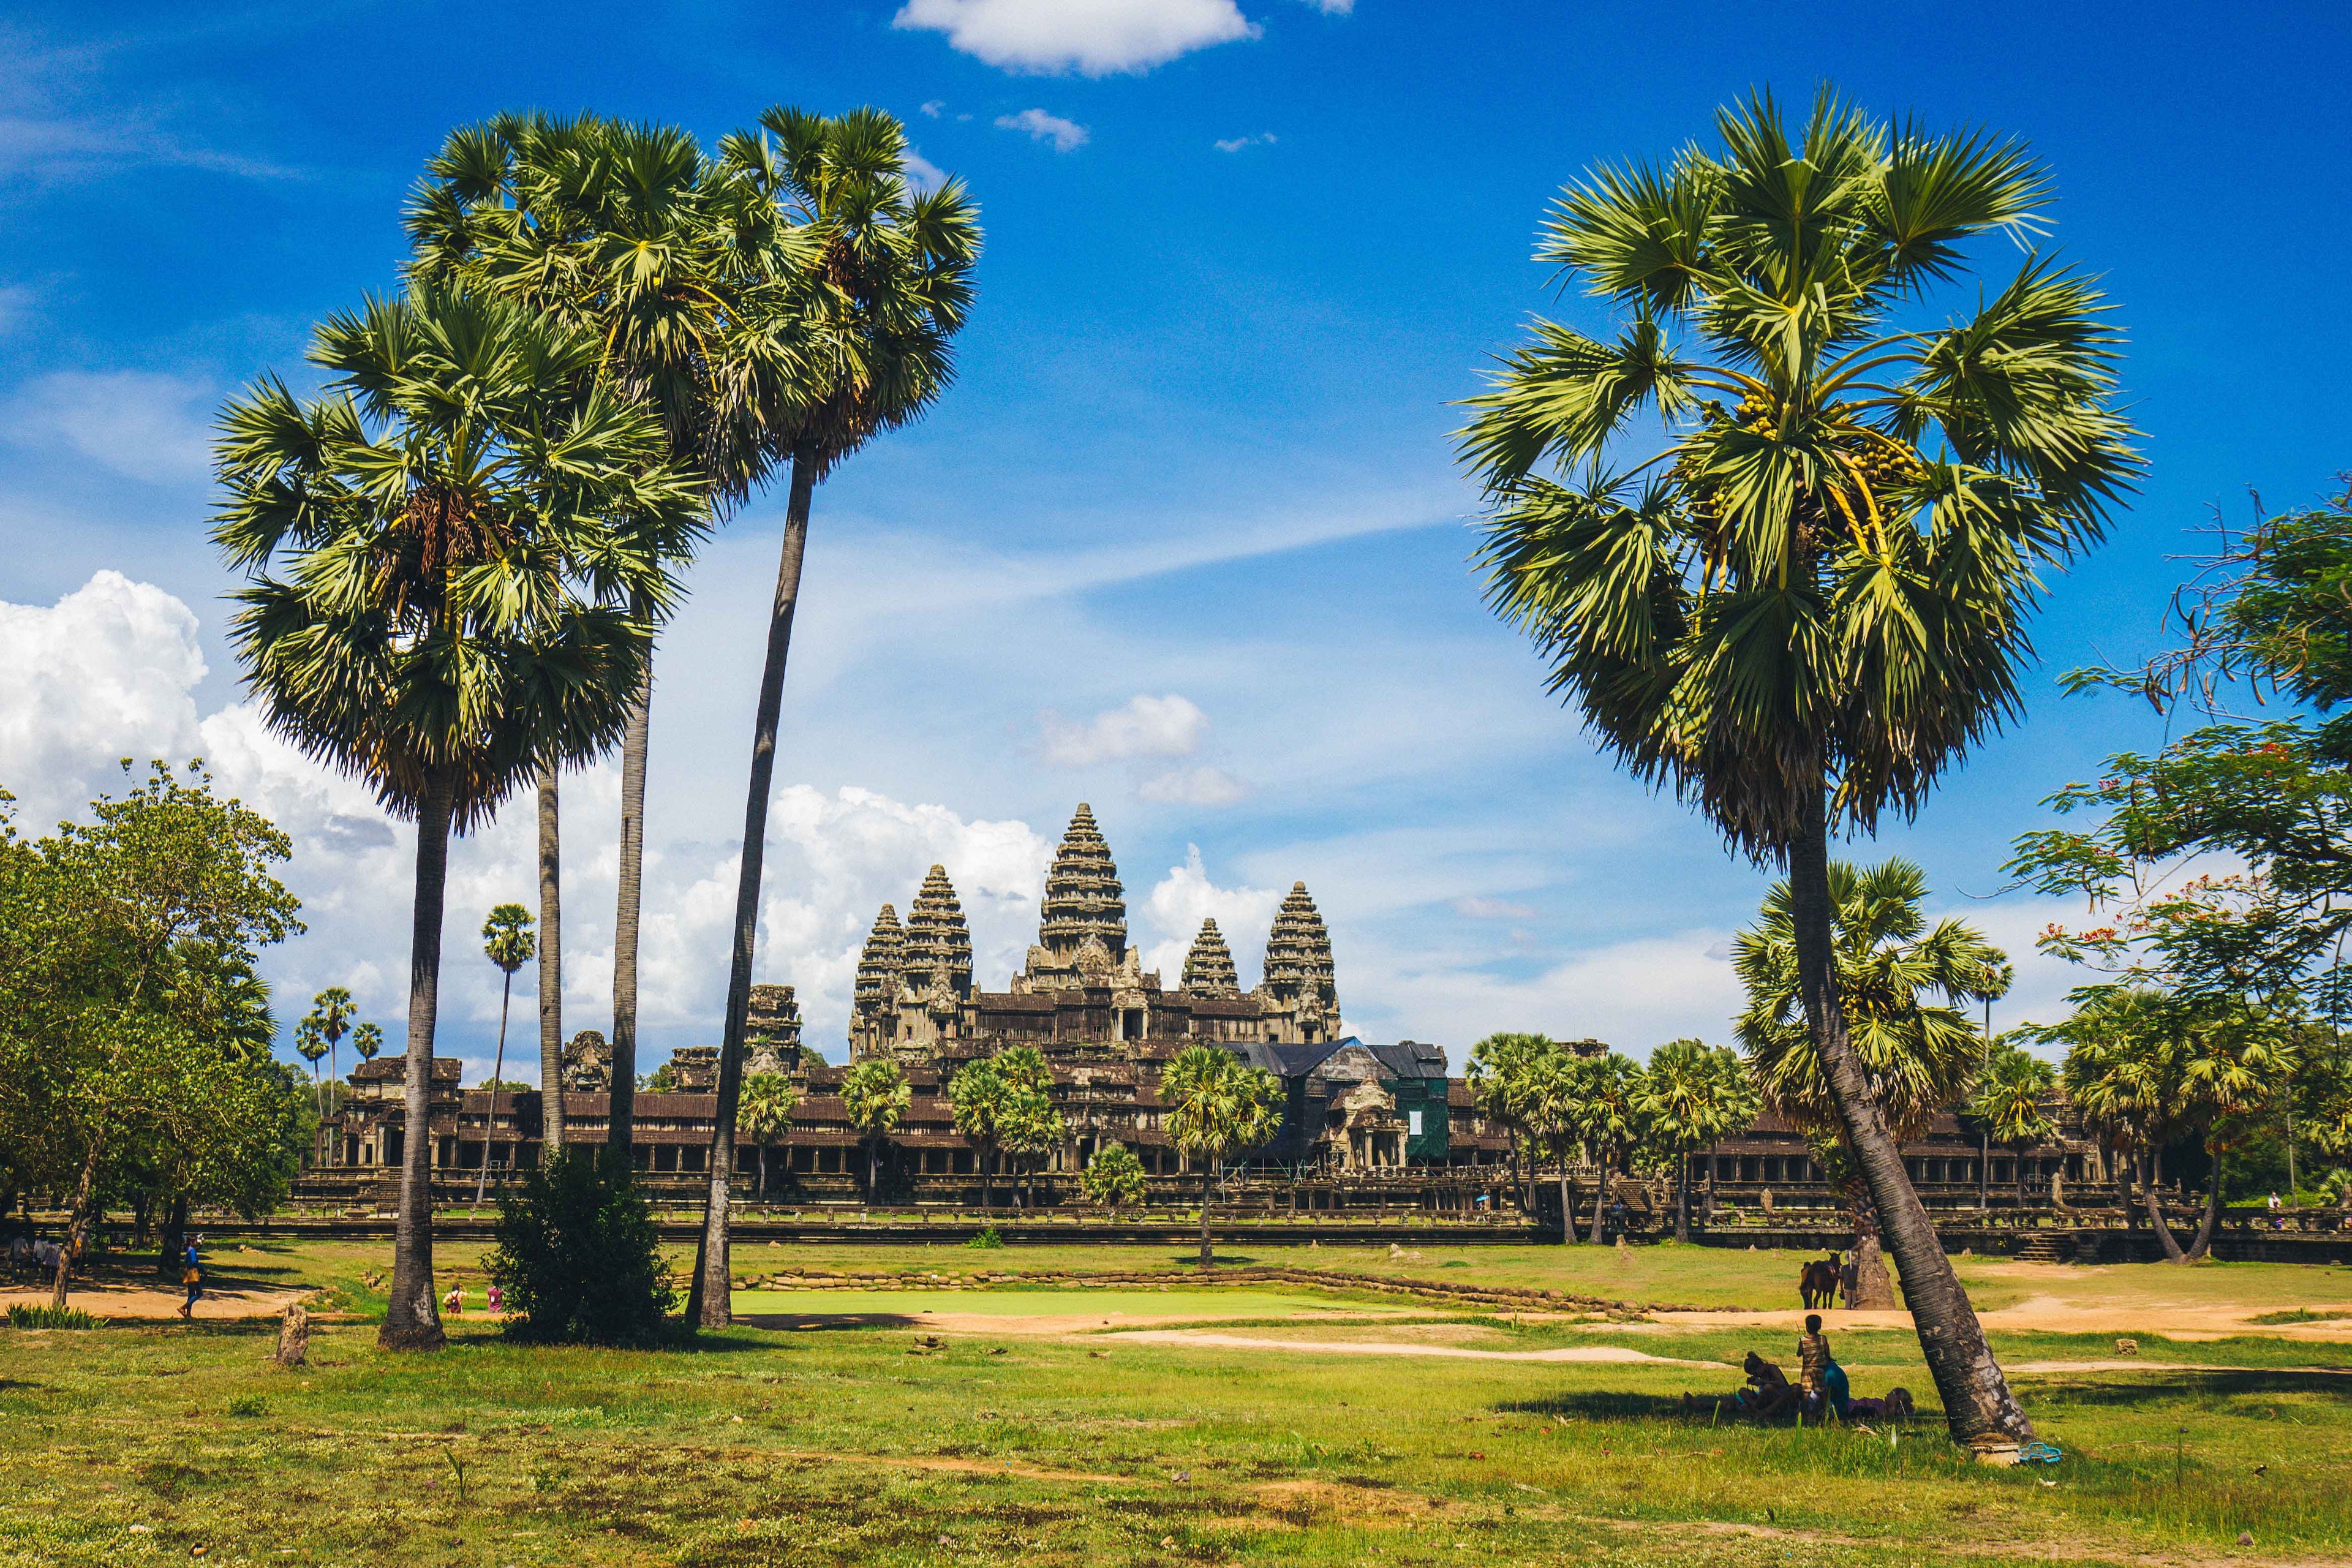 Angkor Wat – The Largest Temple